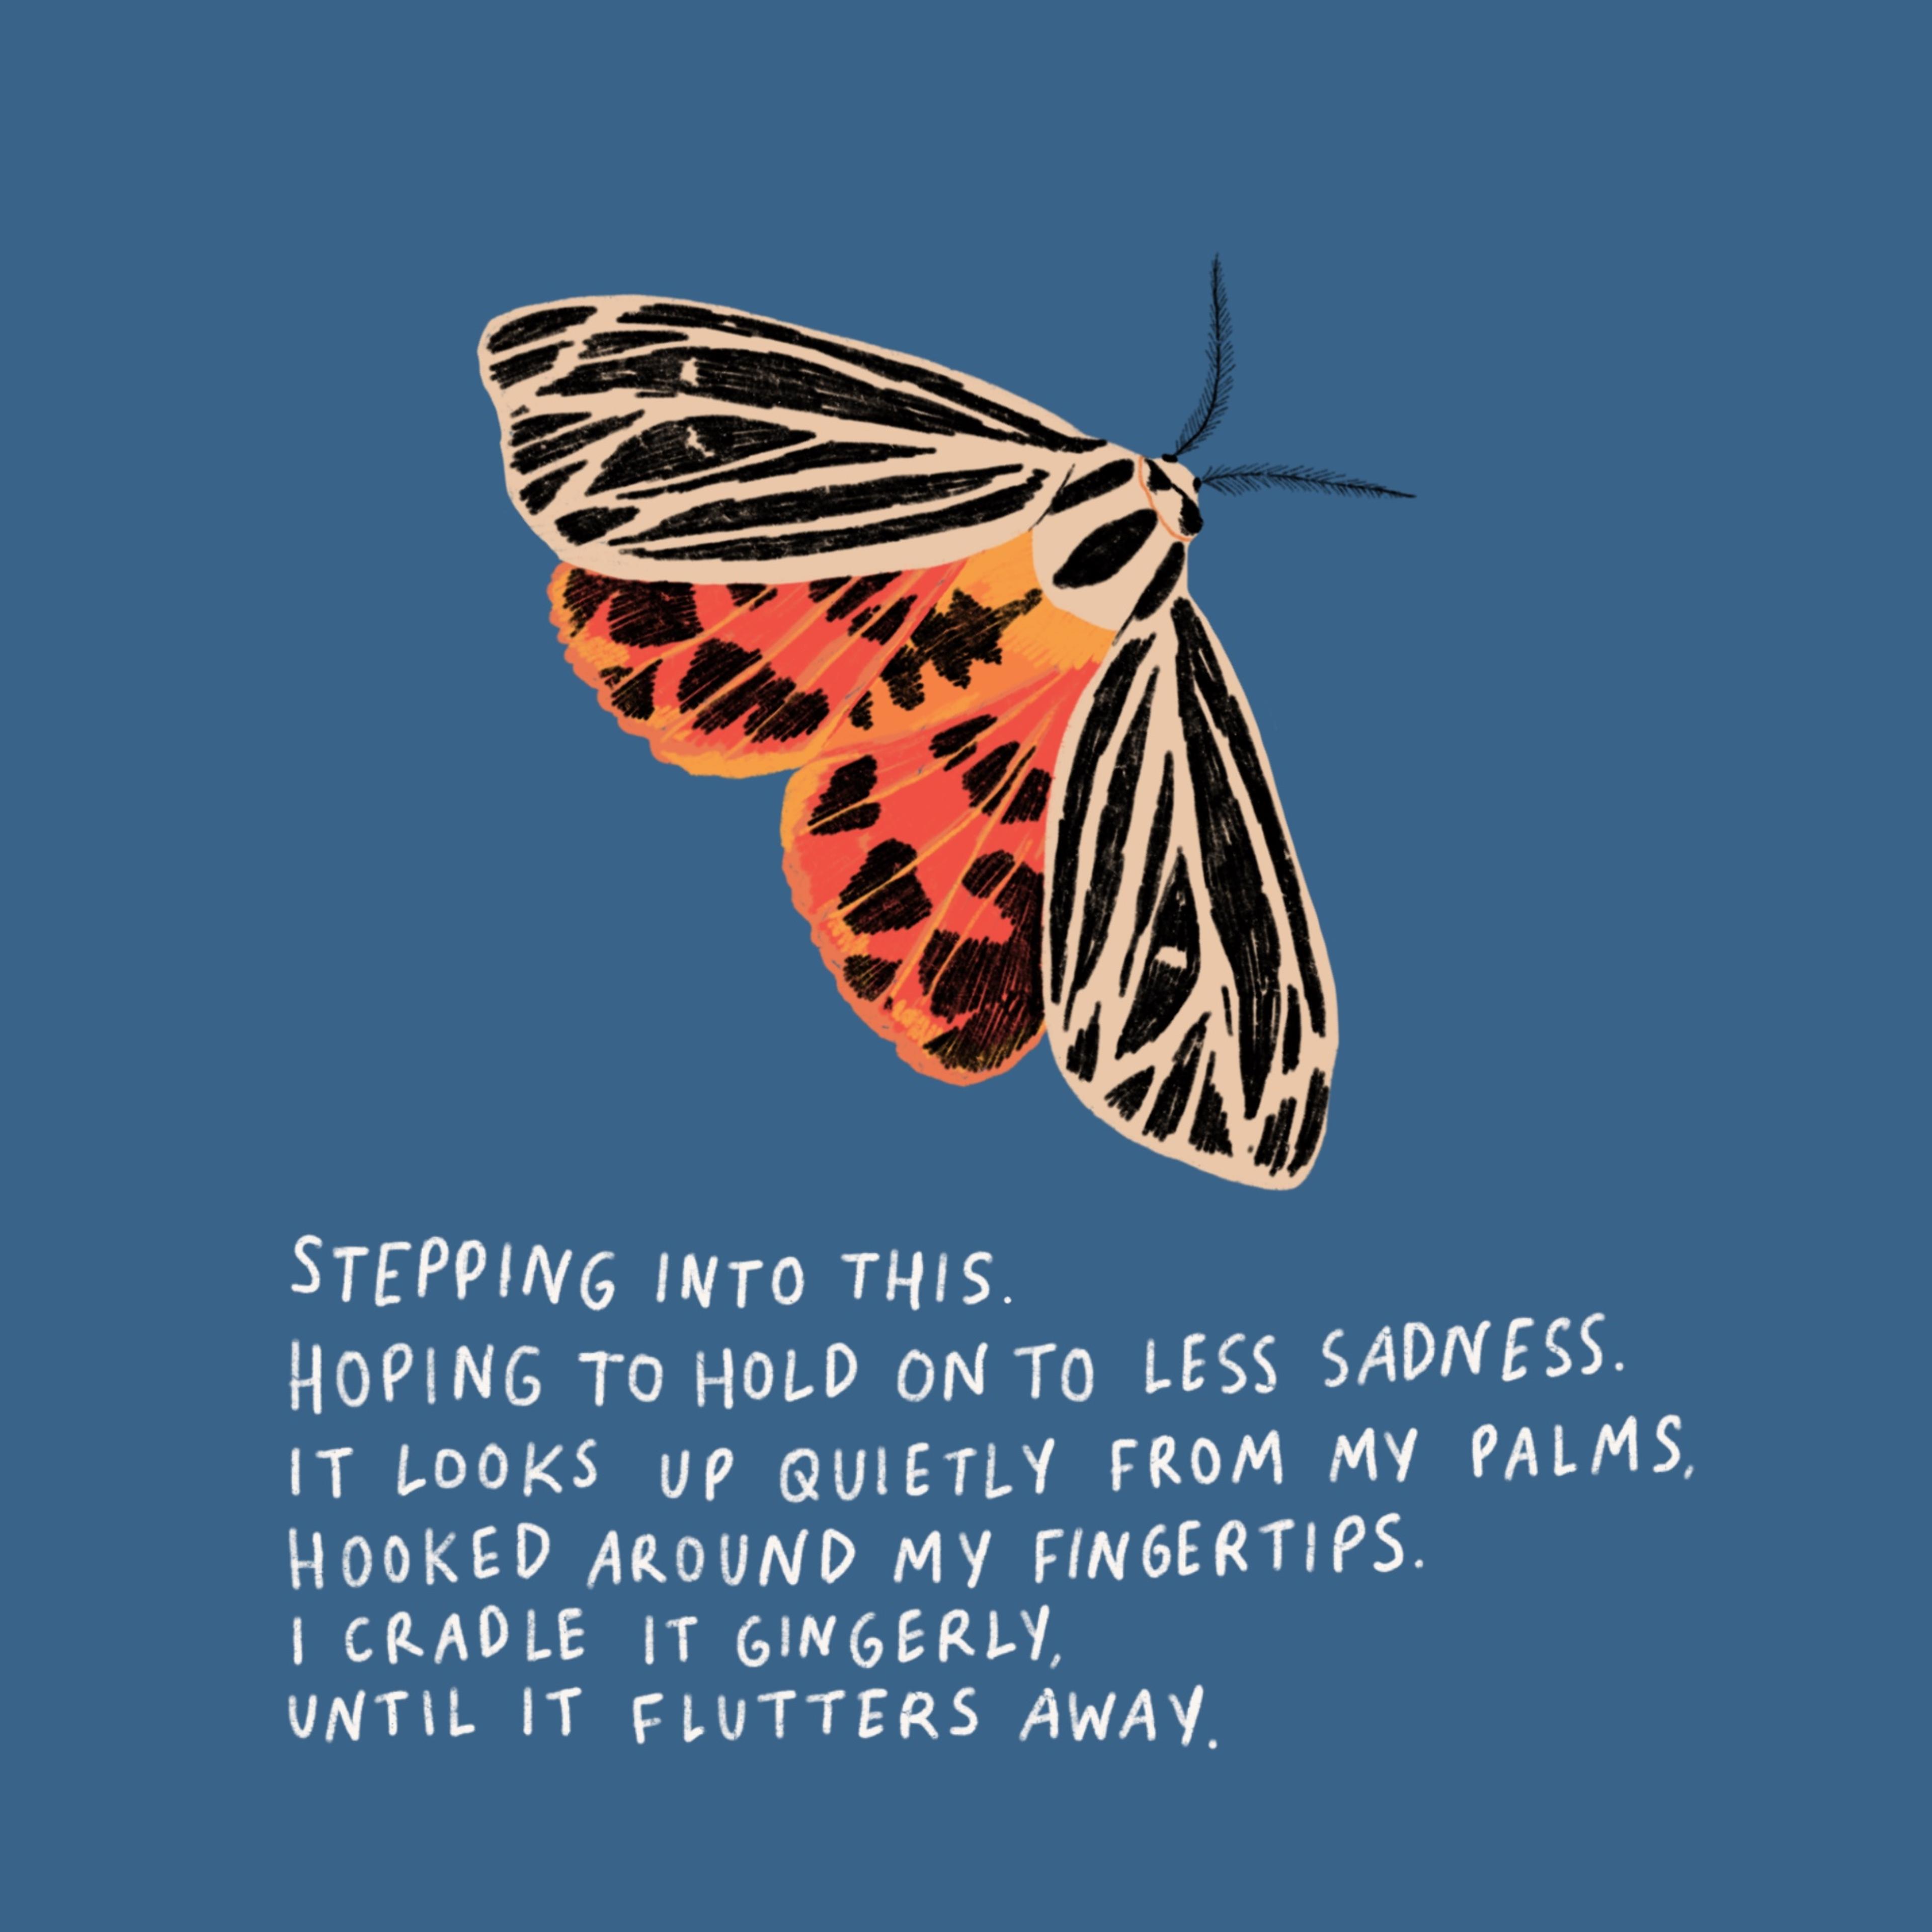 Illustration of a moth, accompanied by a poem likening sadness to a butterfly or a moth.